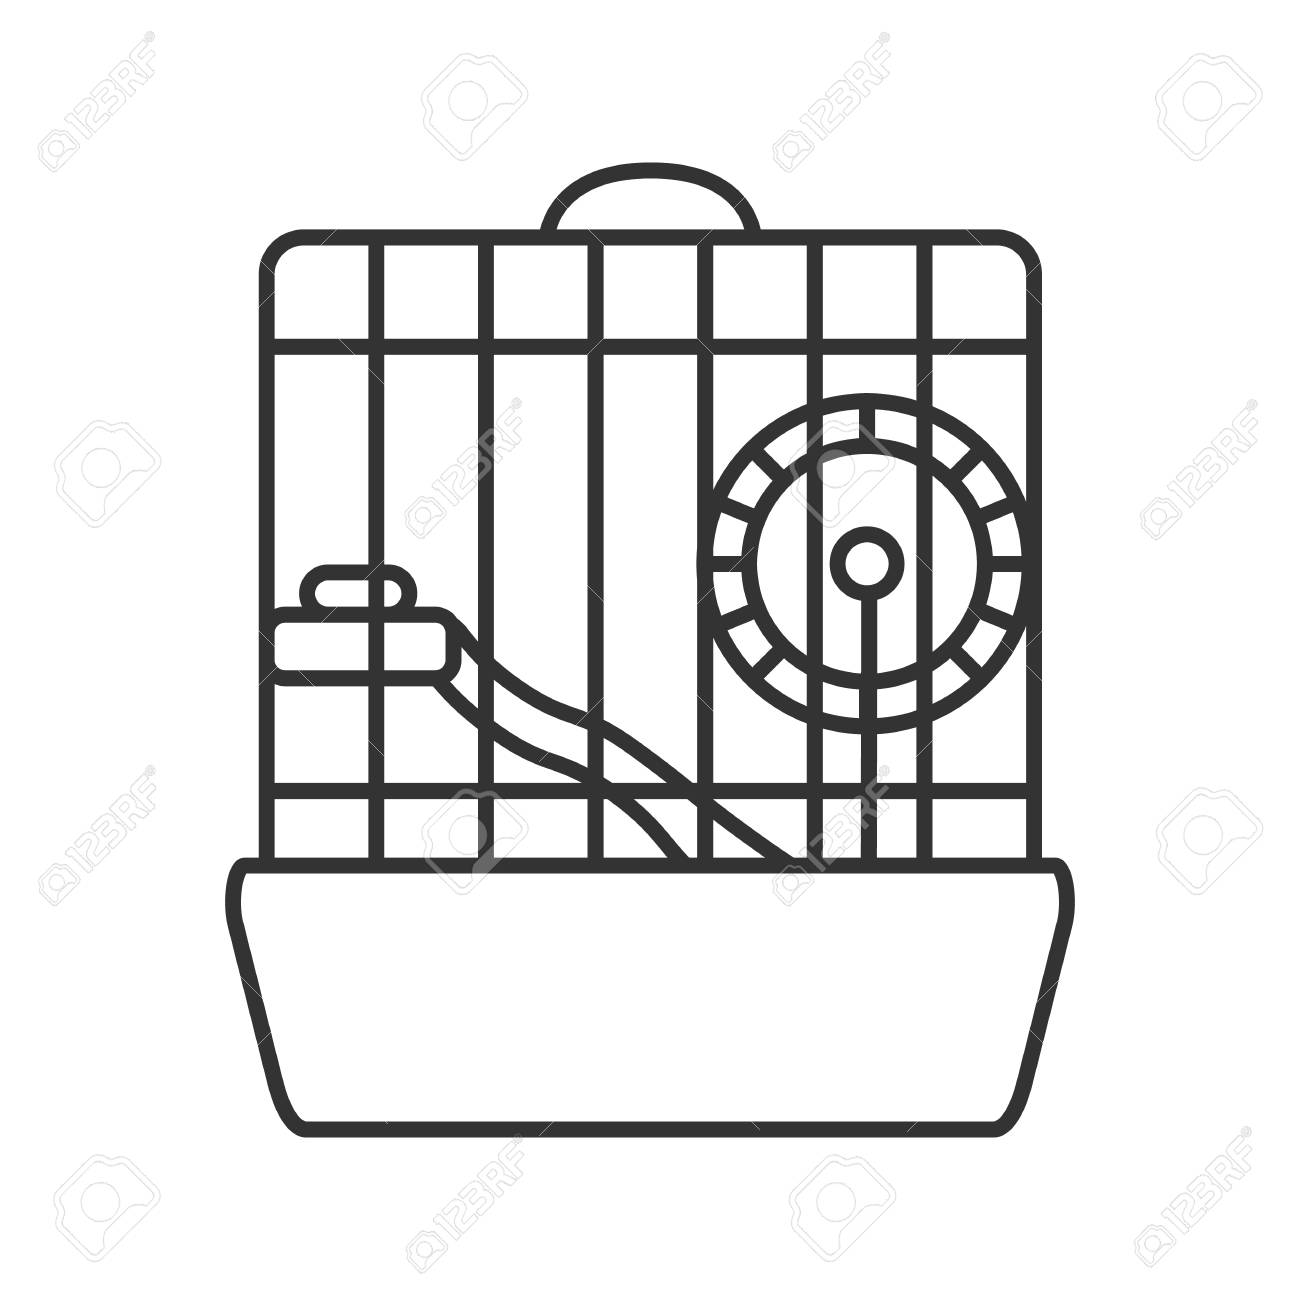 Hamster cage linear icon. Thin line illustration. Rodent wheel.